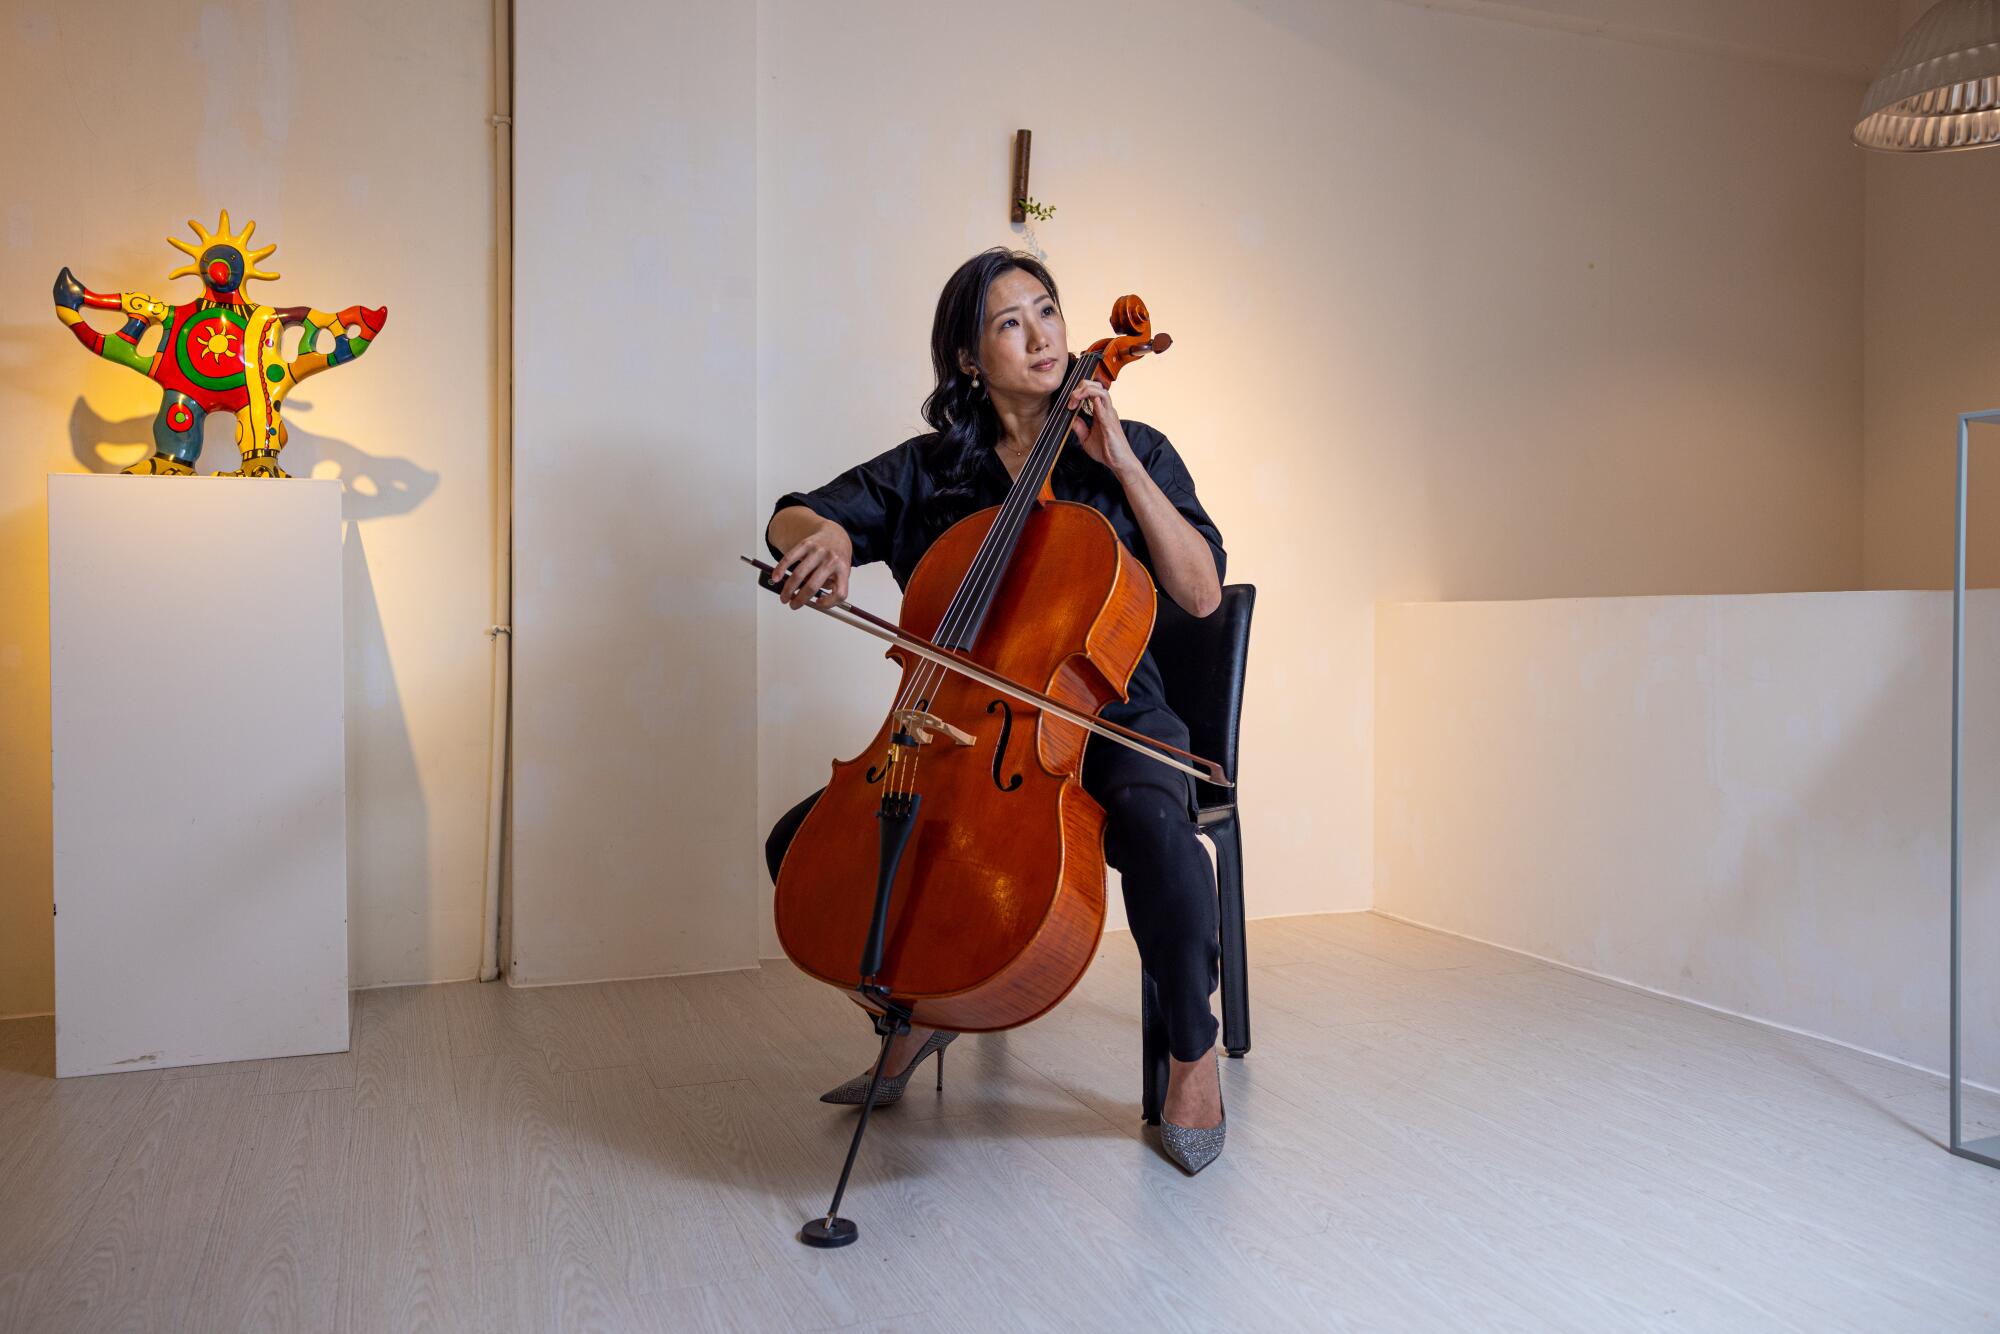 Musician Chang Tao-wen with her cello